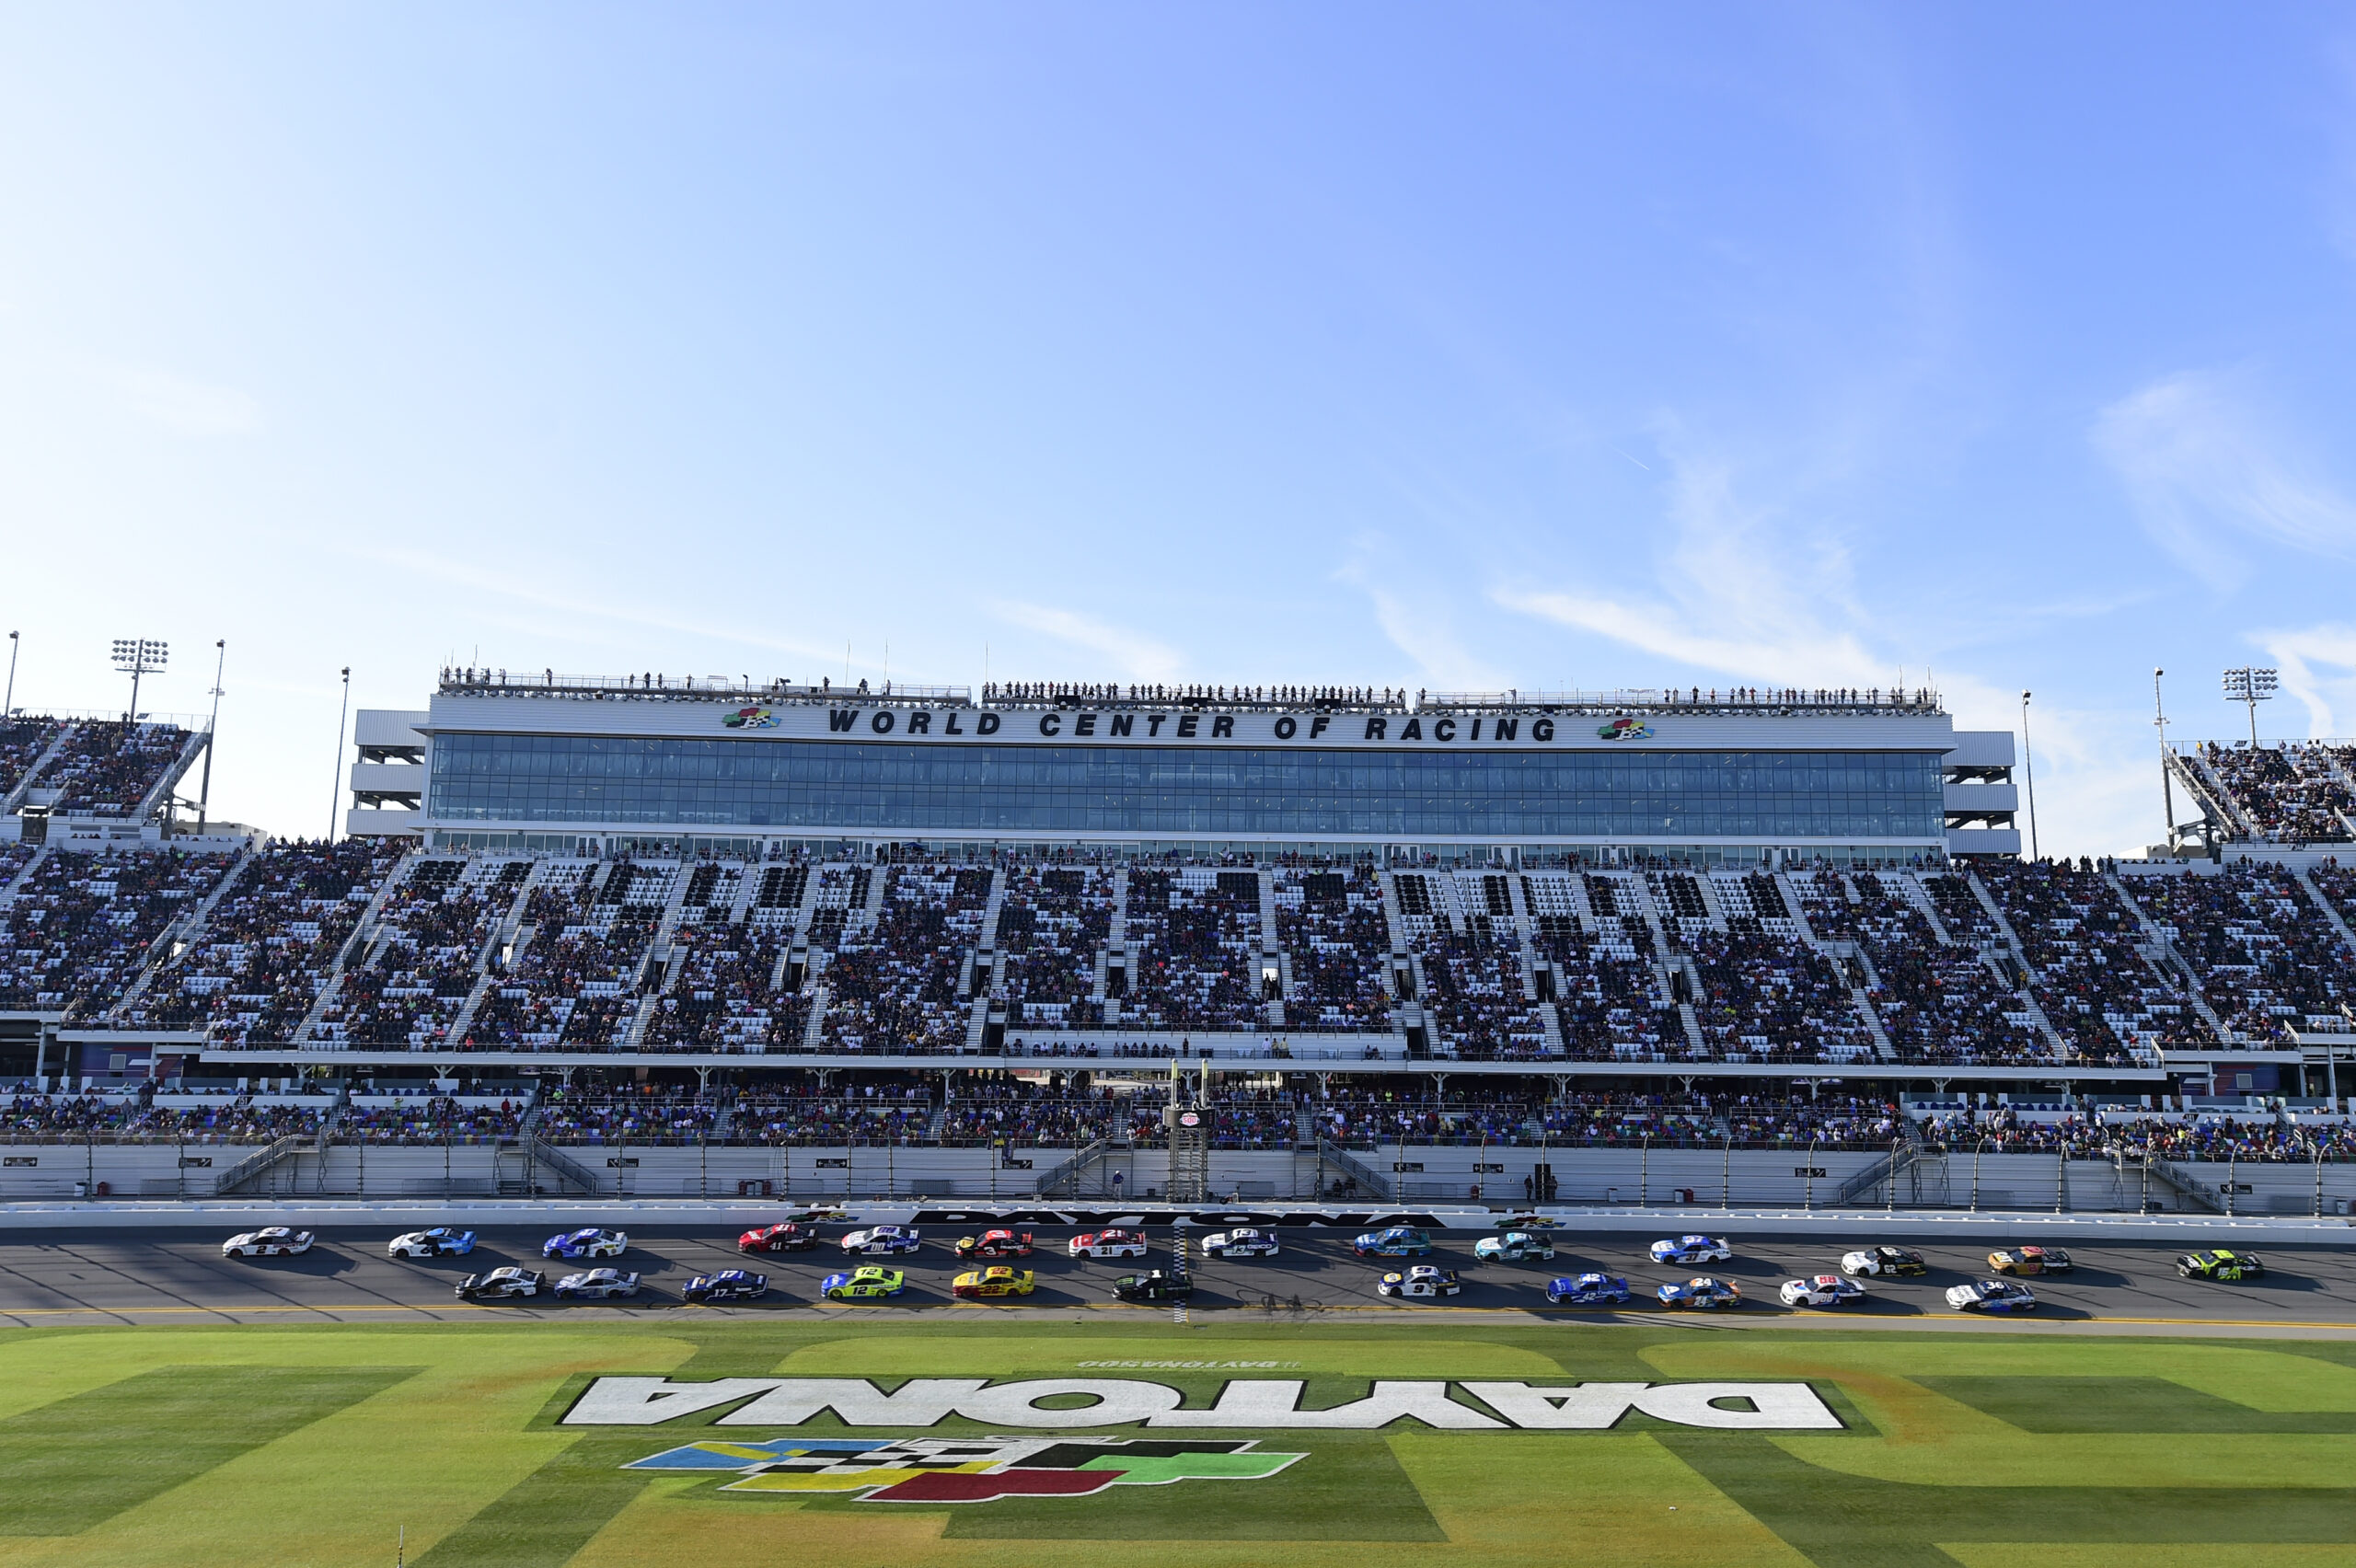 Brad Keselowski leads in the early going of the Daytona 500.(Photo Credit: Jared C. Tilton/Getty Images)